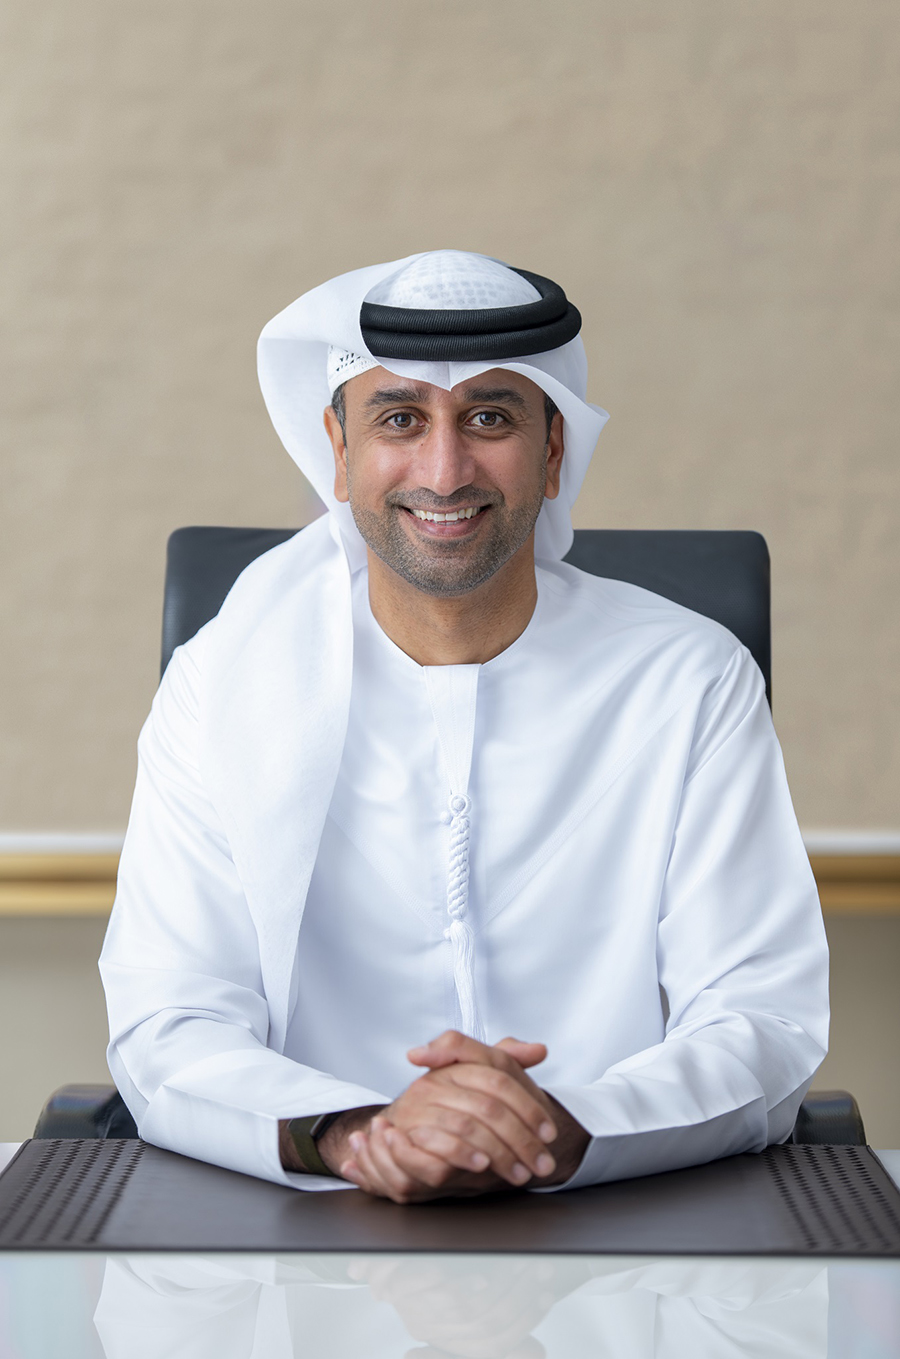 du Announces Launch Of Two New Data Centers To Support Digital Transformation Projects And Expand Its Digital Infrastructure Presence Across The UAE